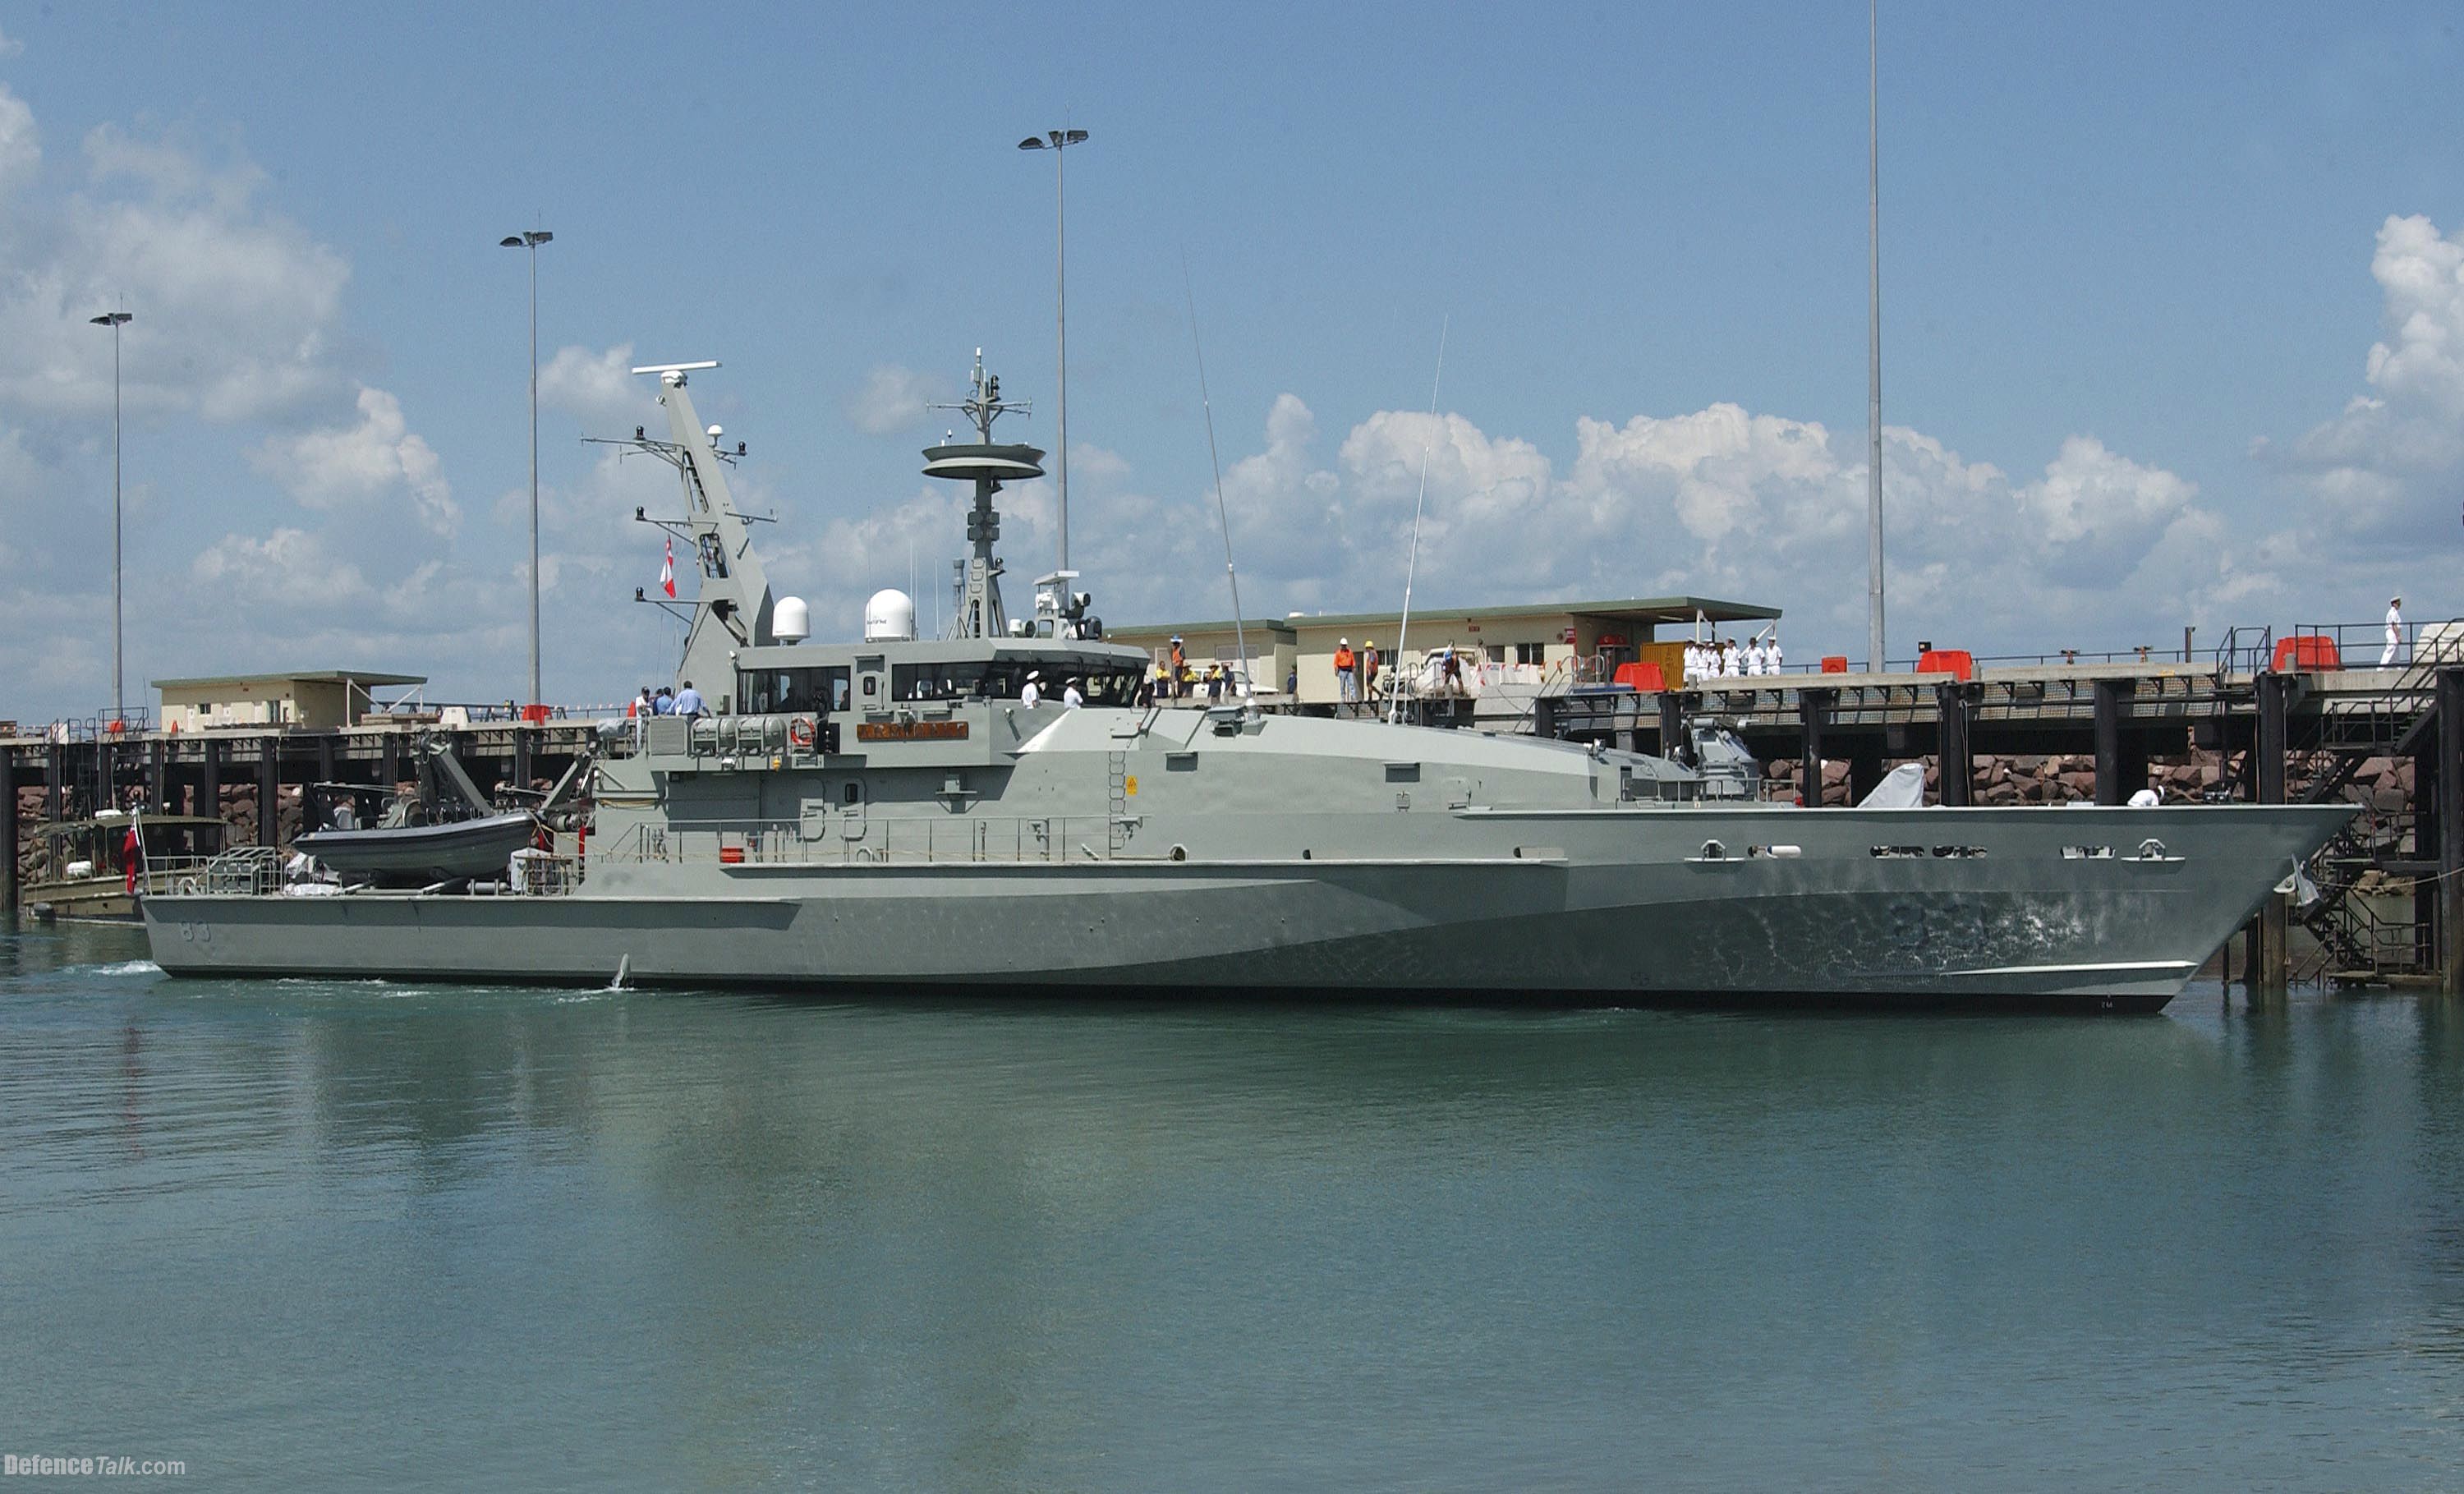 The RAN's first Armidale class patrol boat on trials. It's armed with a 25m